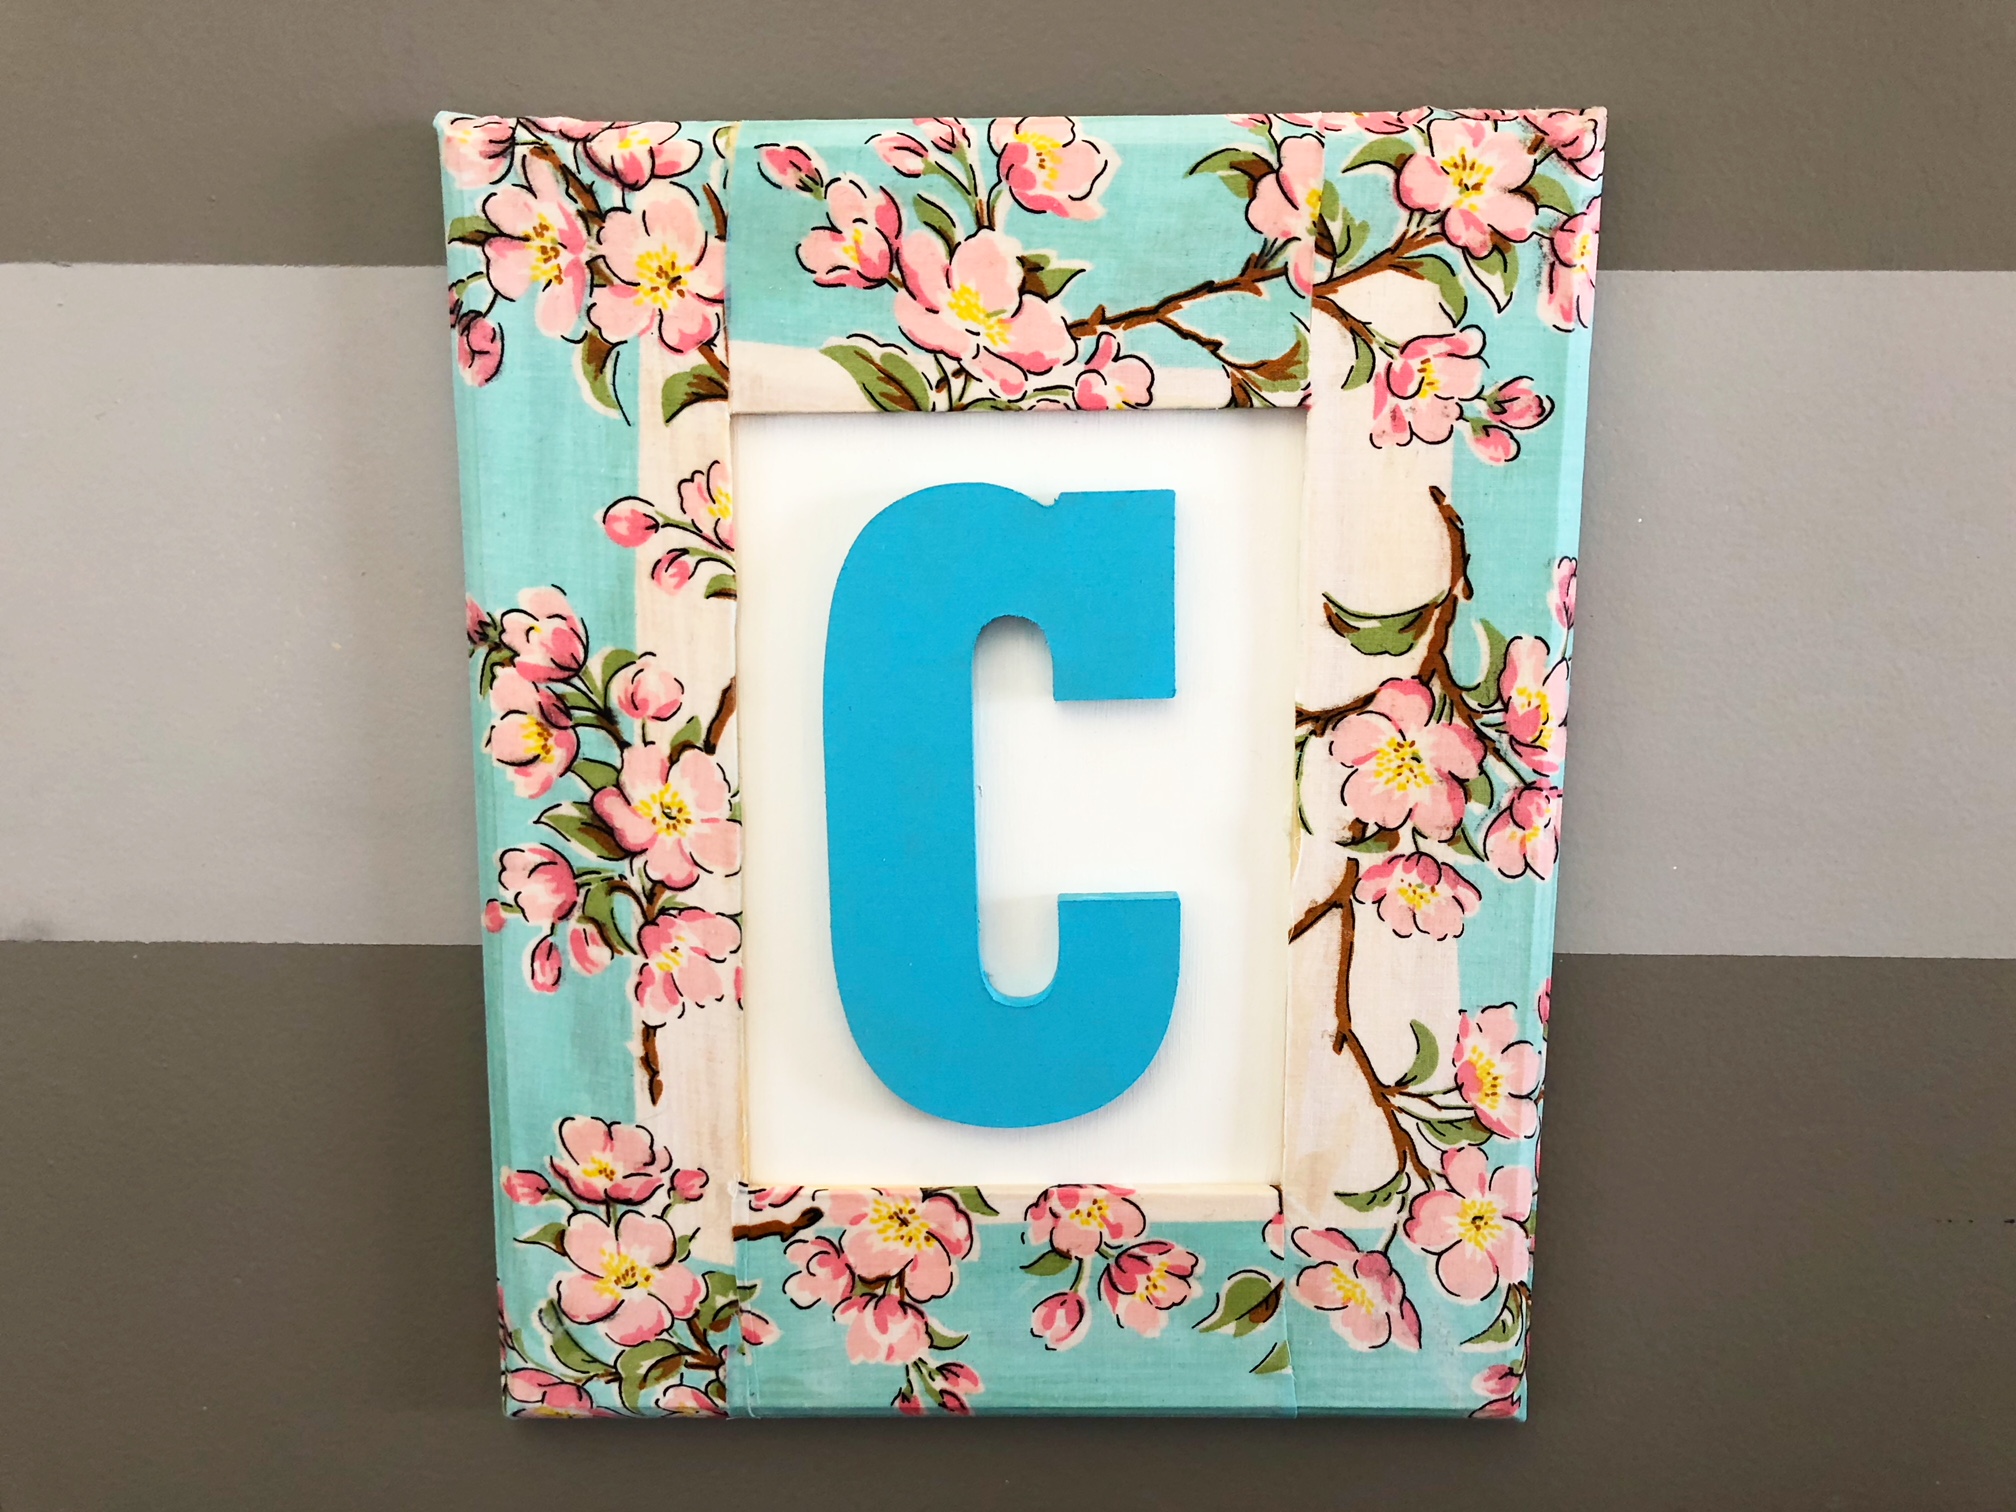 Hand made picture frame. Used old bible pages with Hodge podge glue. Made  flower with hot glue and fabric wit…